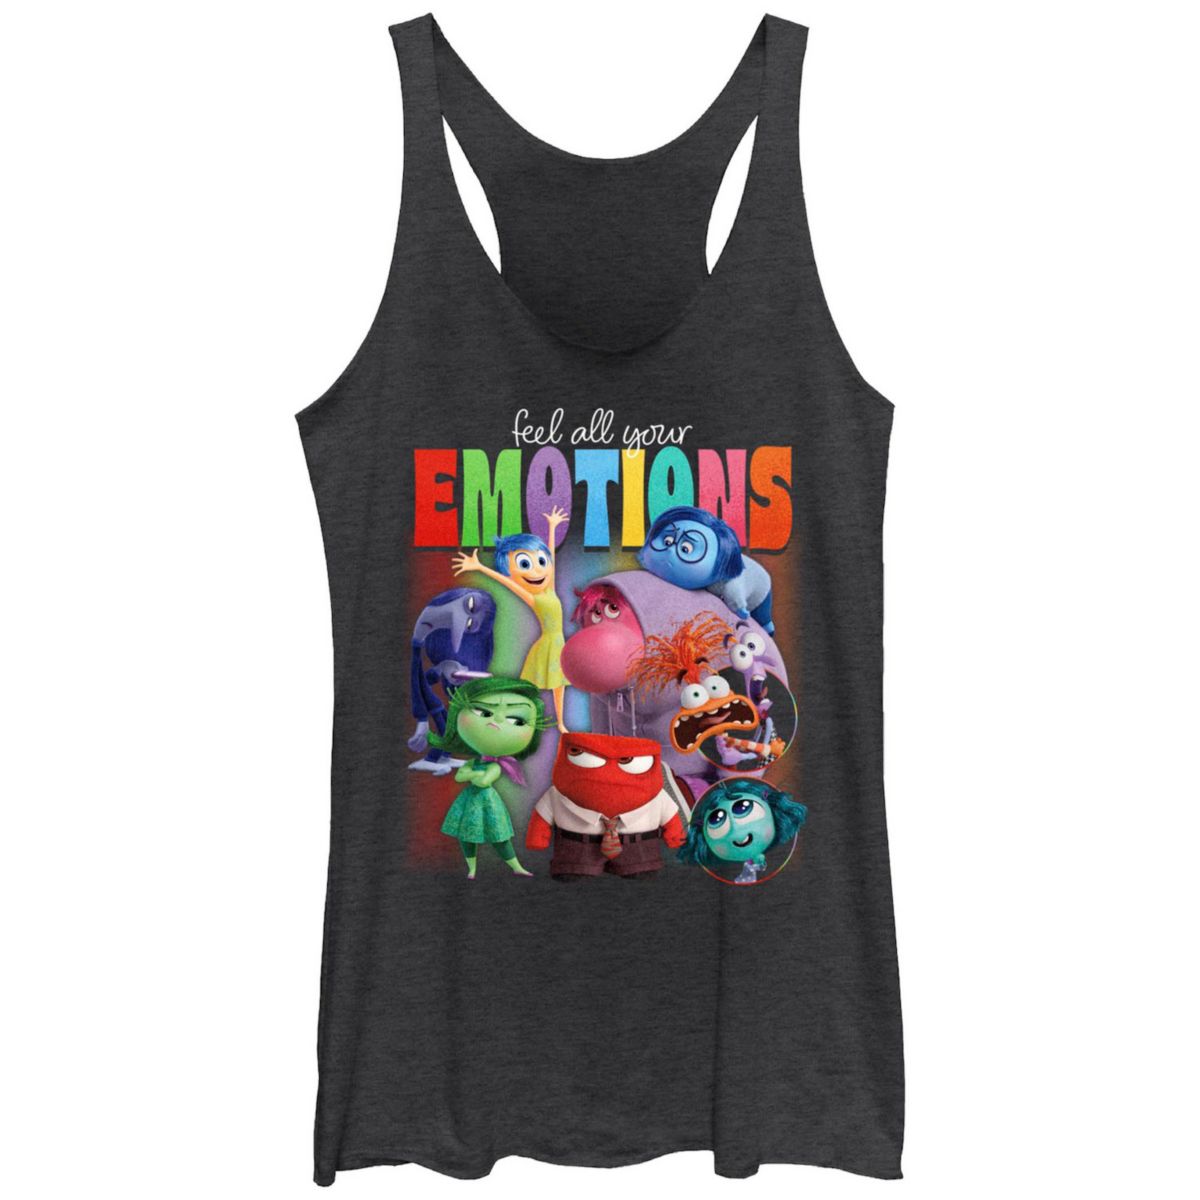 Disney / Pixar's Inside Out 2 Feel All Your Emotions Juniors' Graphic Racerback Tank Top Disney